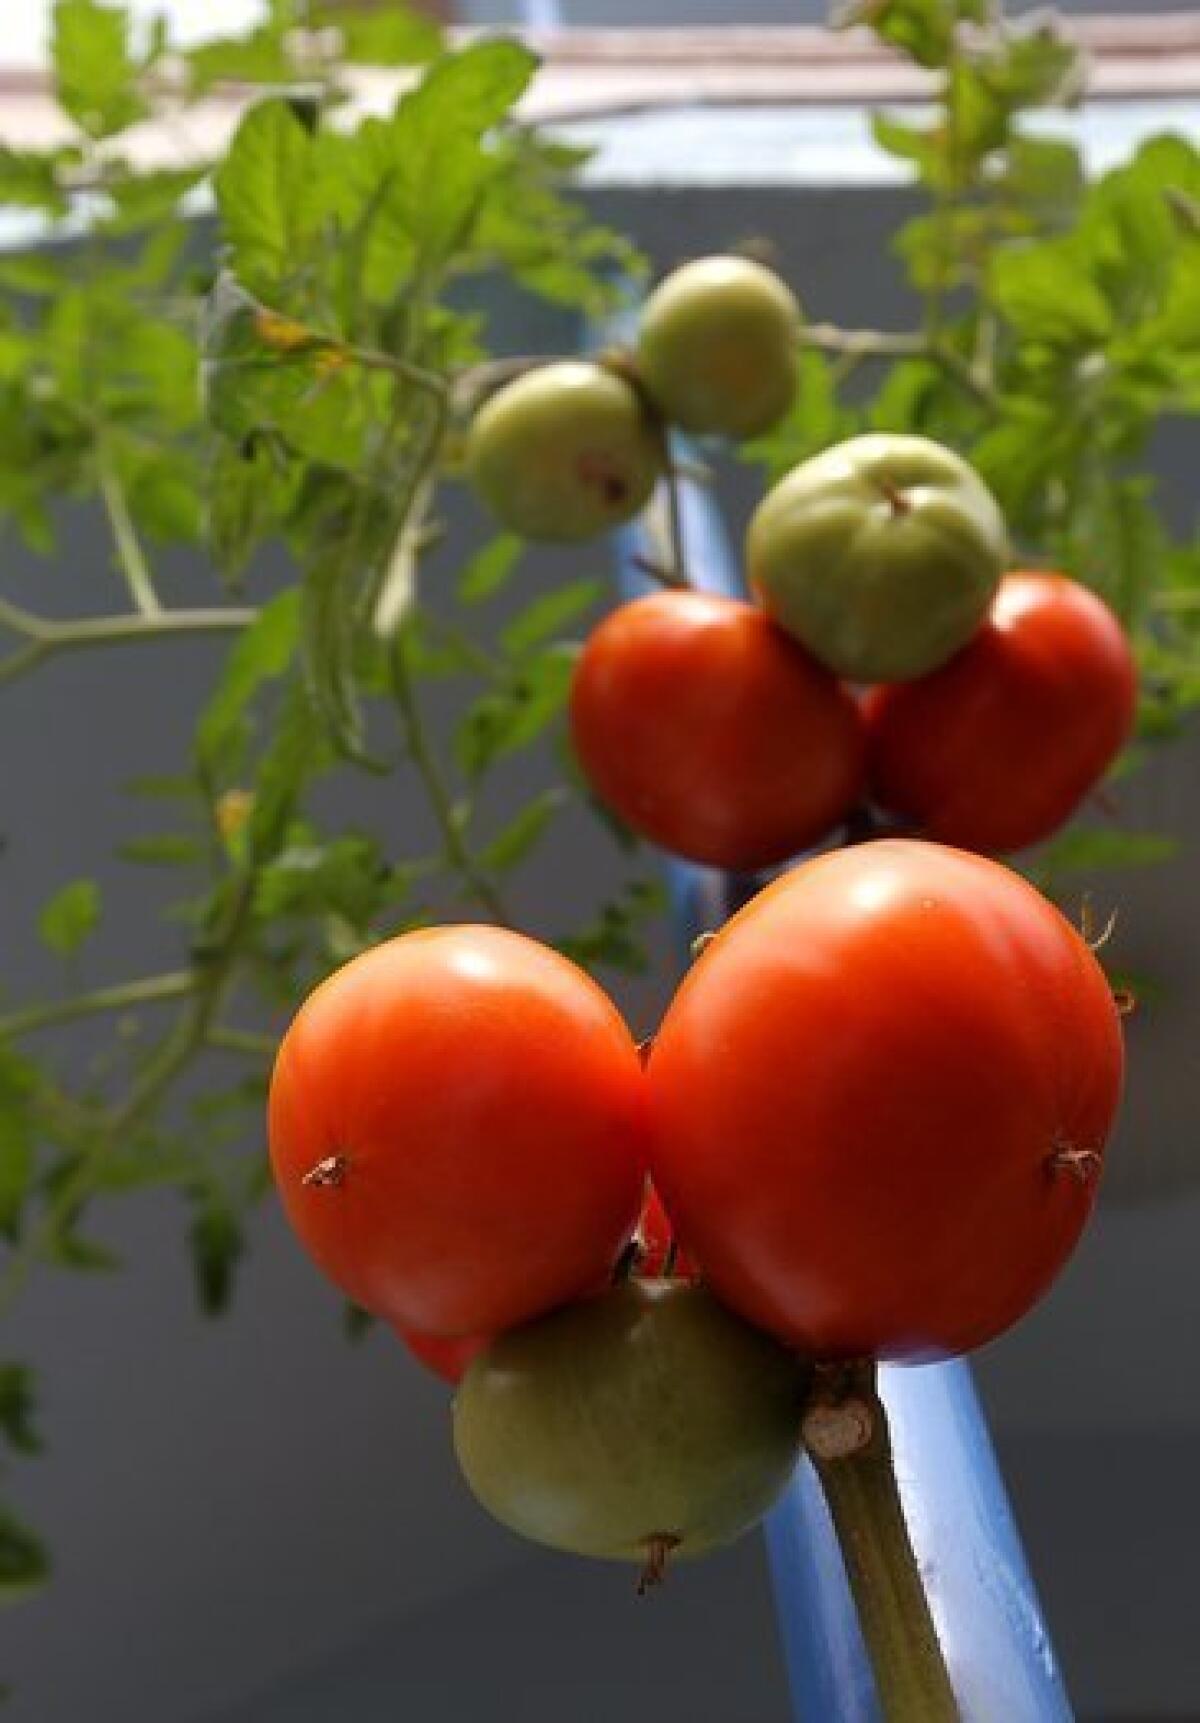 Researchers at UCLA have genetically engineered tomatoes that mimic the actions of good cholesterol when digested by mice.